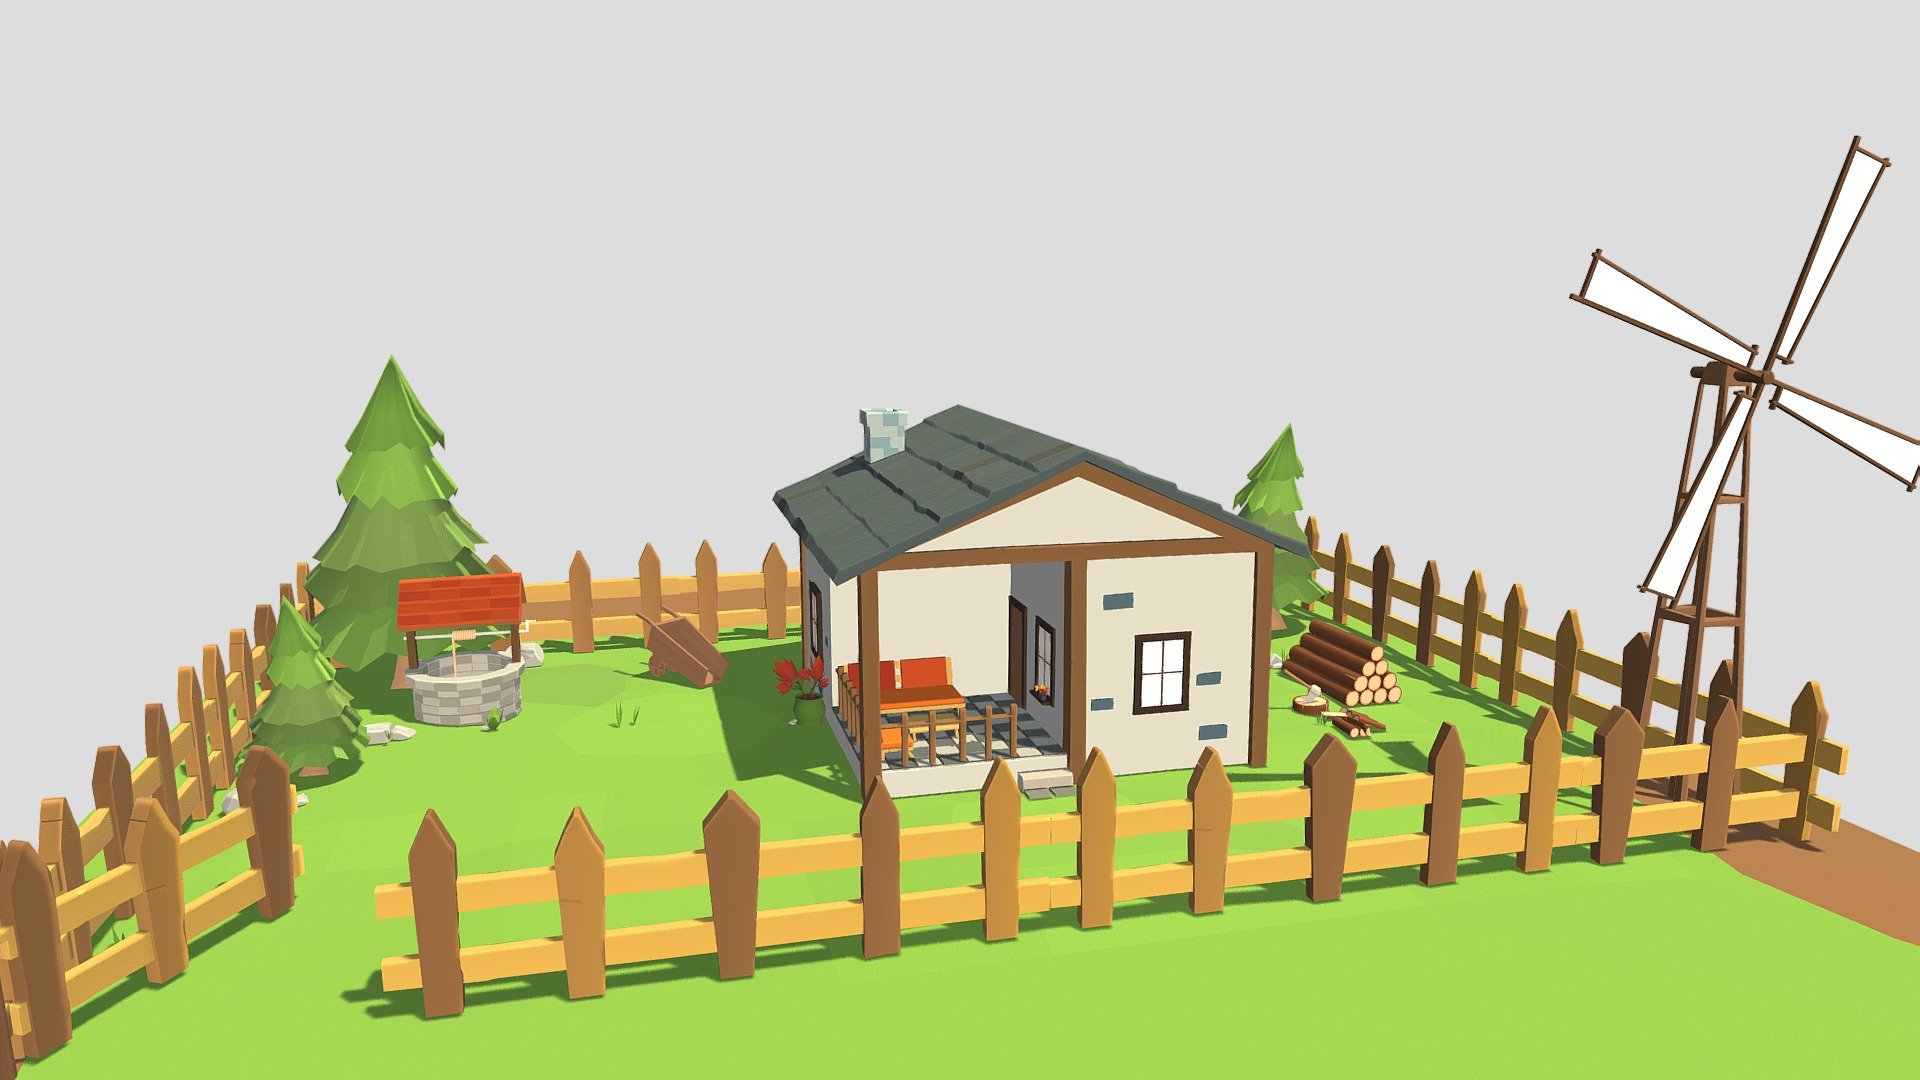 You can freely use each object in this 3d farm model designed as low poly in your independent game projects 3d model